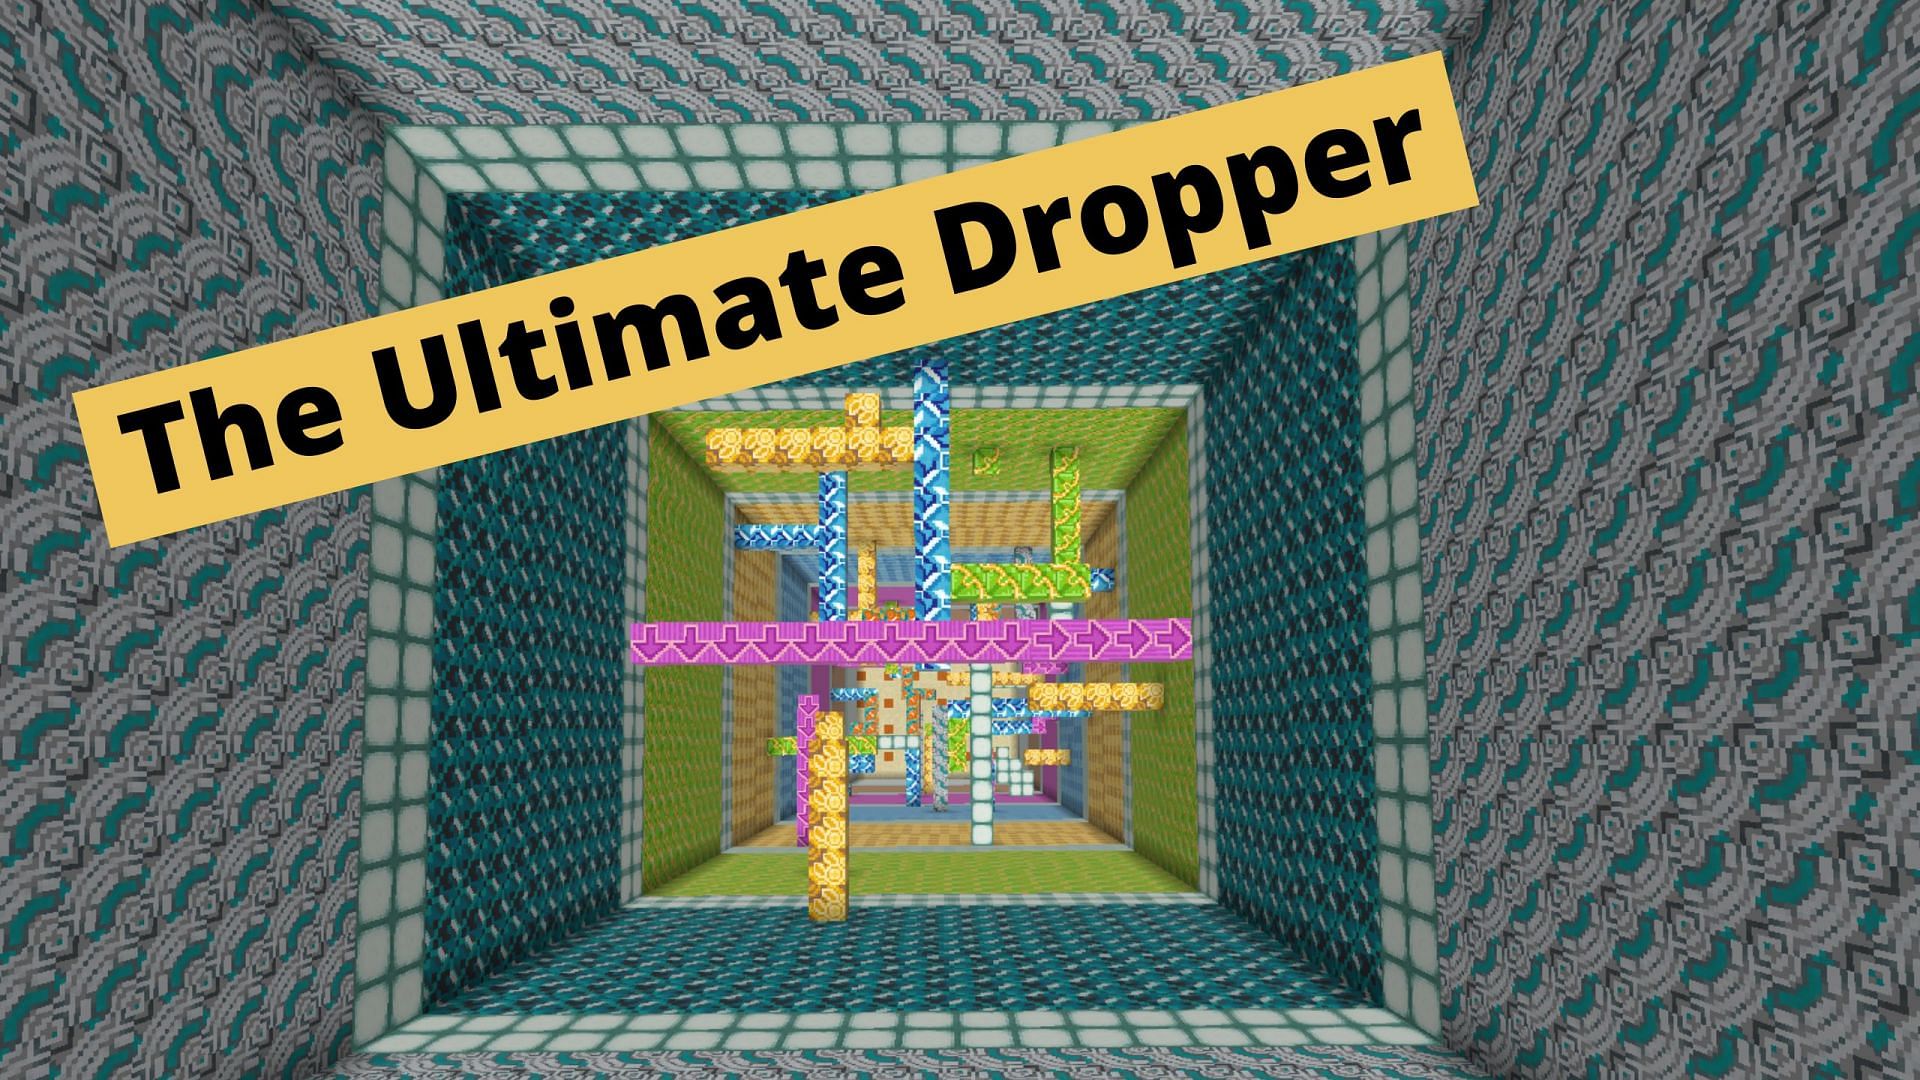 The Ultimate Dropper Map contains several different dropper courses to complete (Image via Minecraftmaps.com)